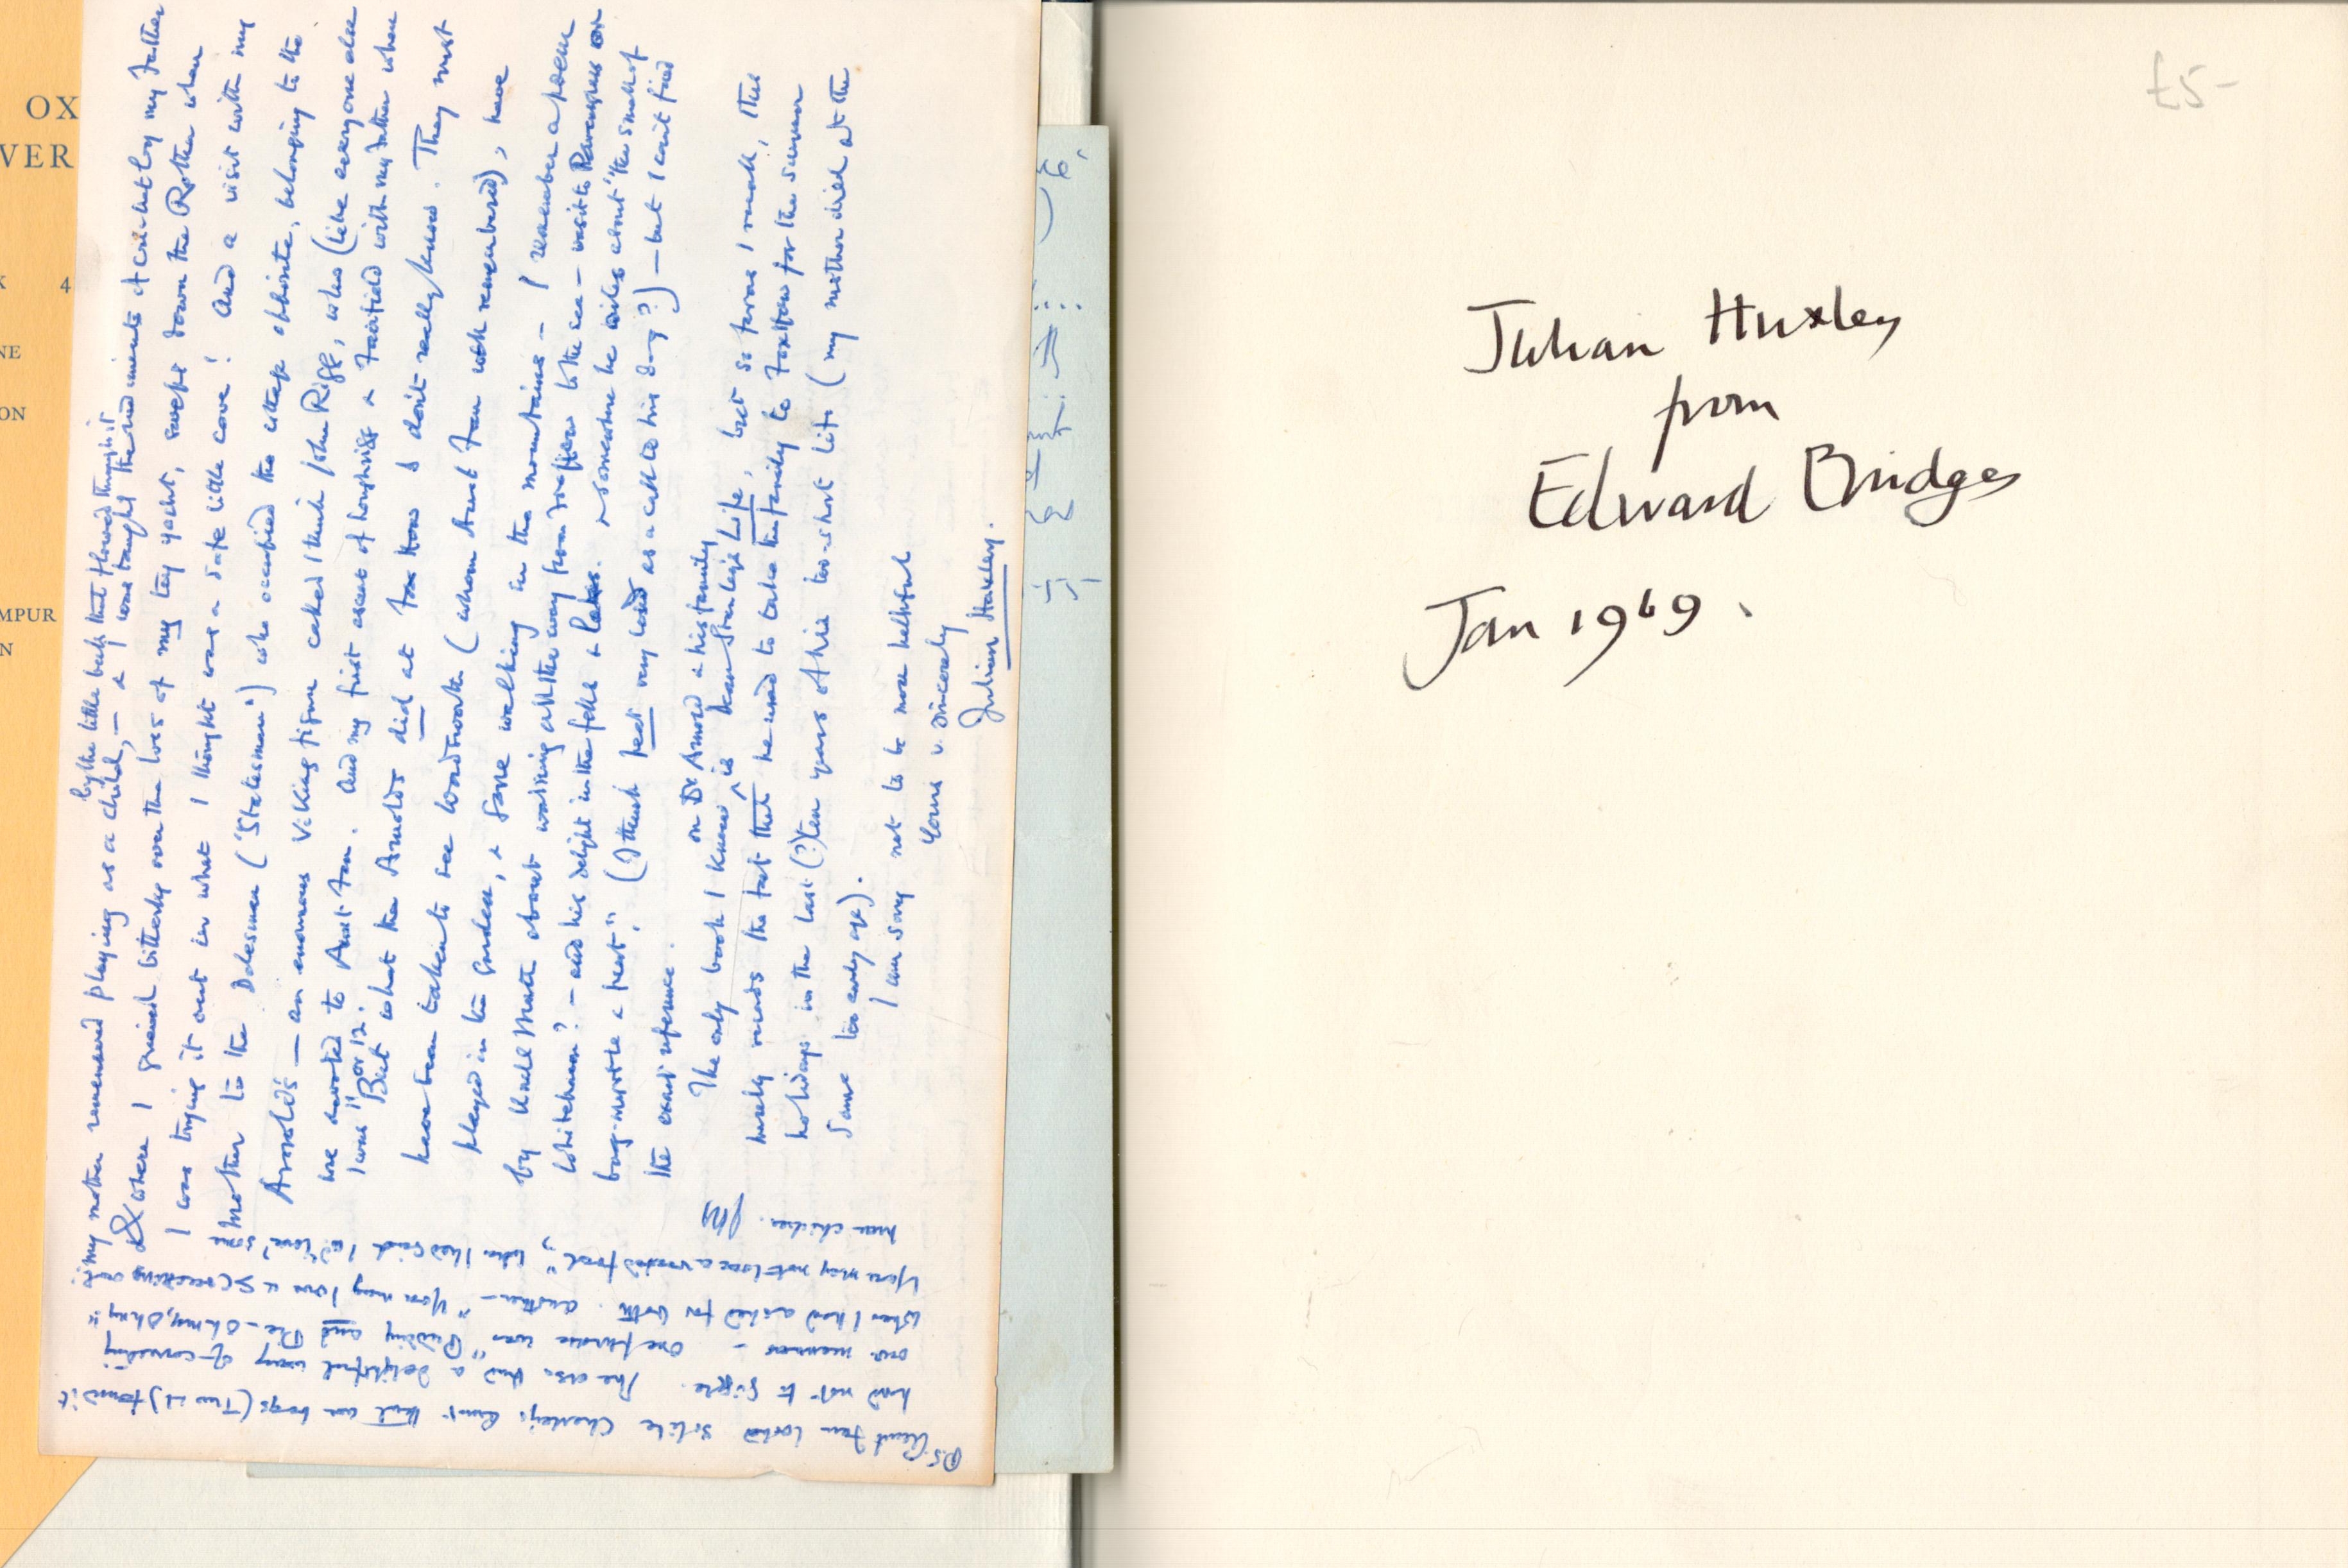 Sir Julian Huxley inscribed book and ALS dated Jan 1969 to him from Edward Bridges titled The - Image 2 of 4